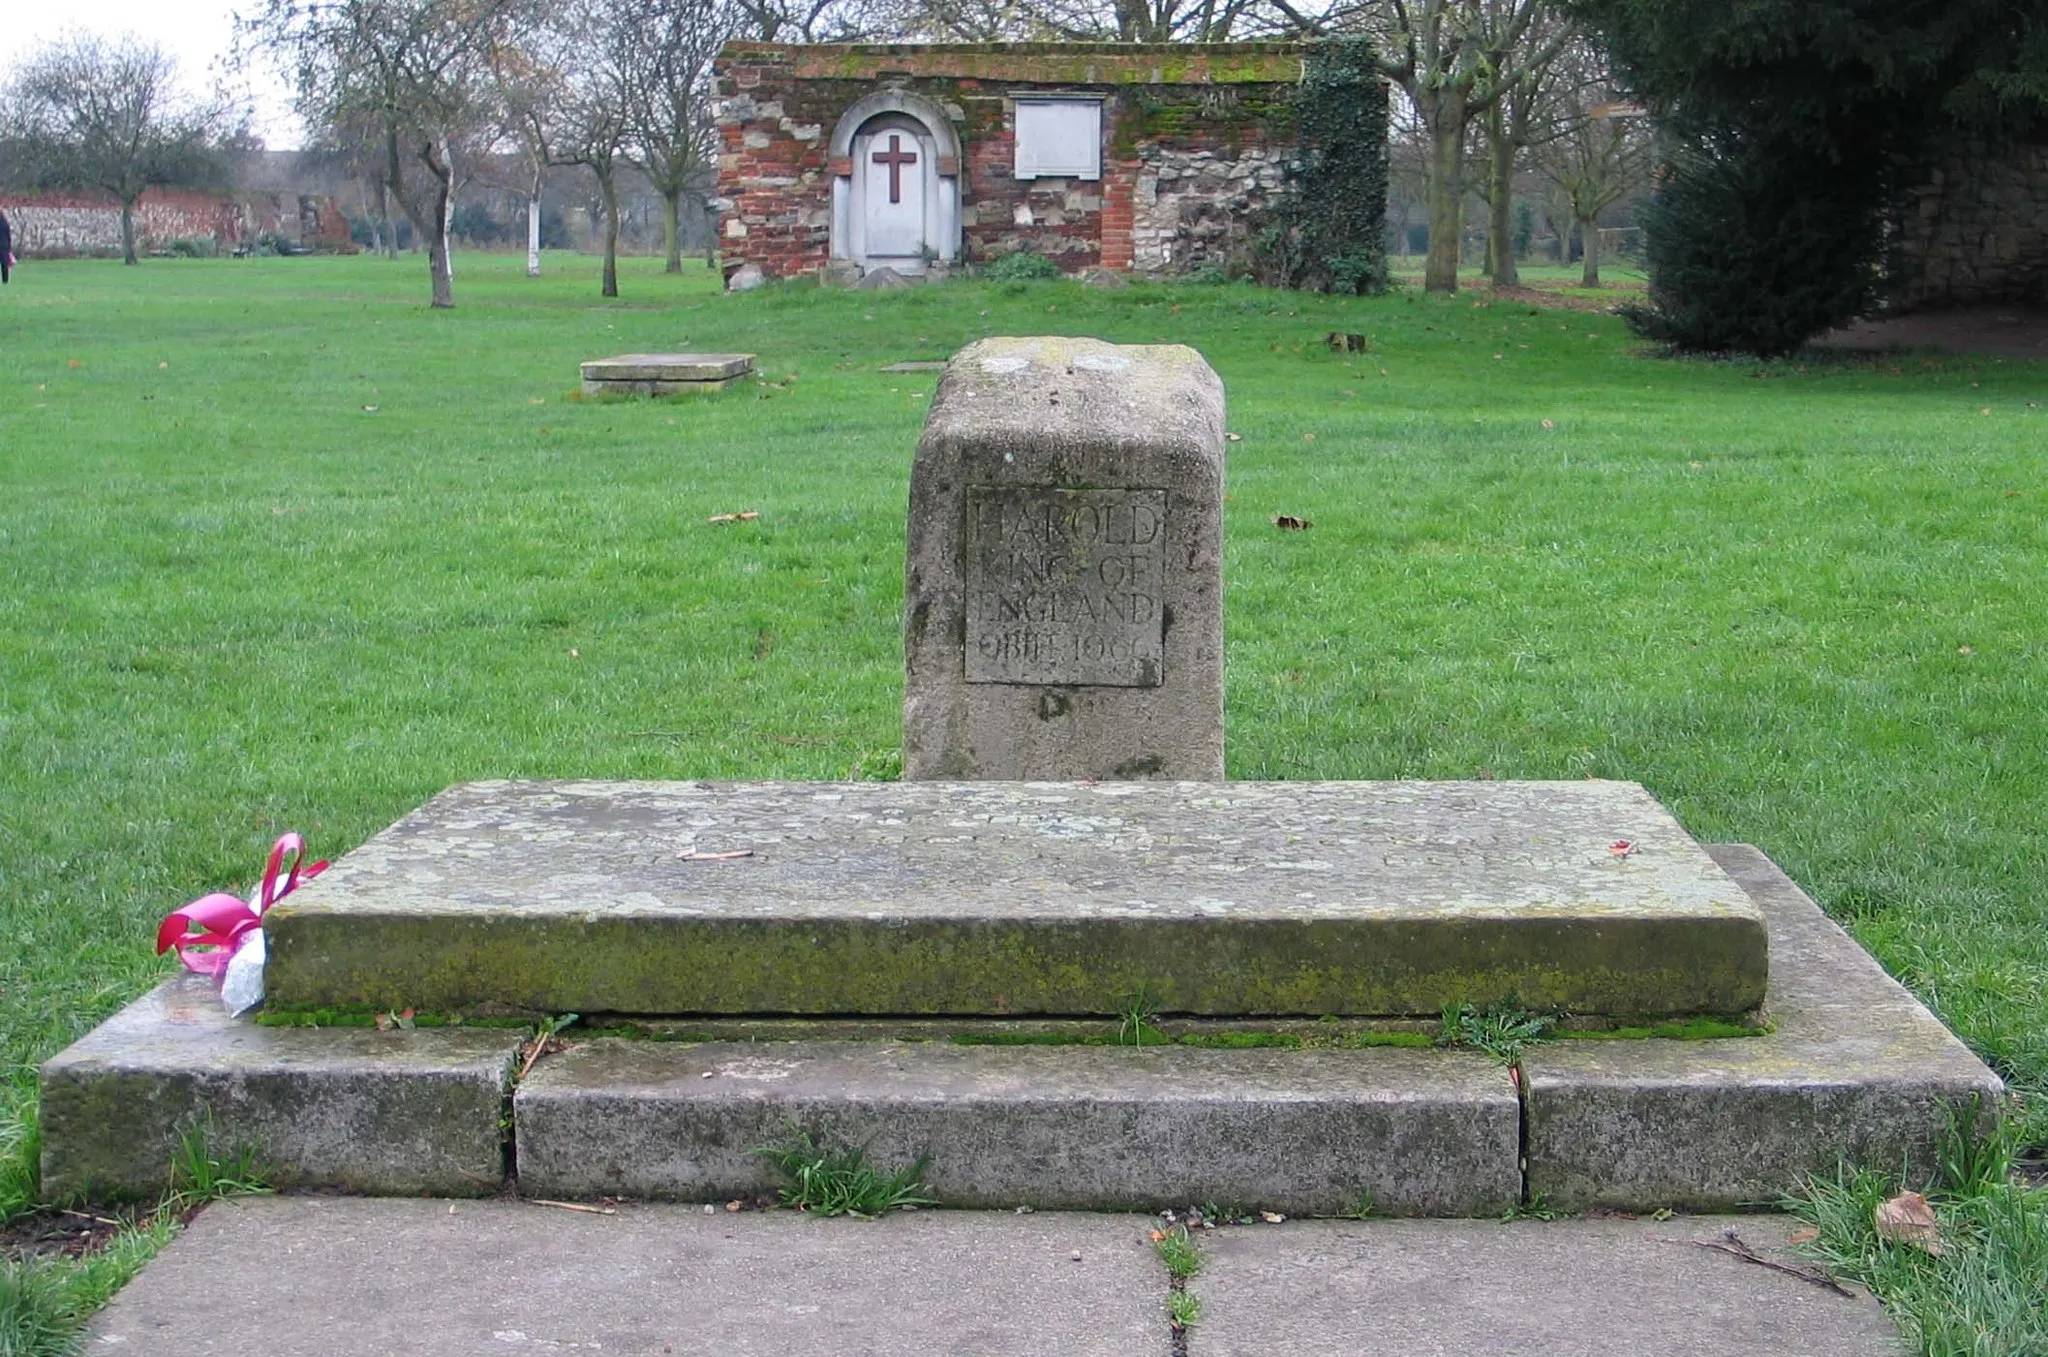 Photo showing: Tombe d'Harold II à Waltham
The tomb of Harold II at Waltham Abbey